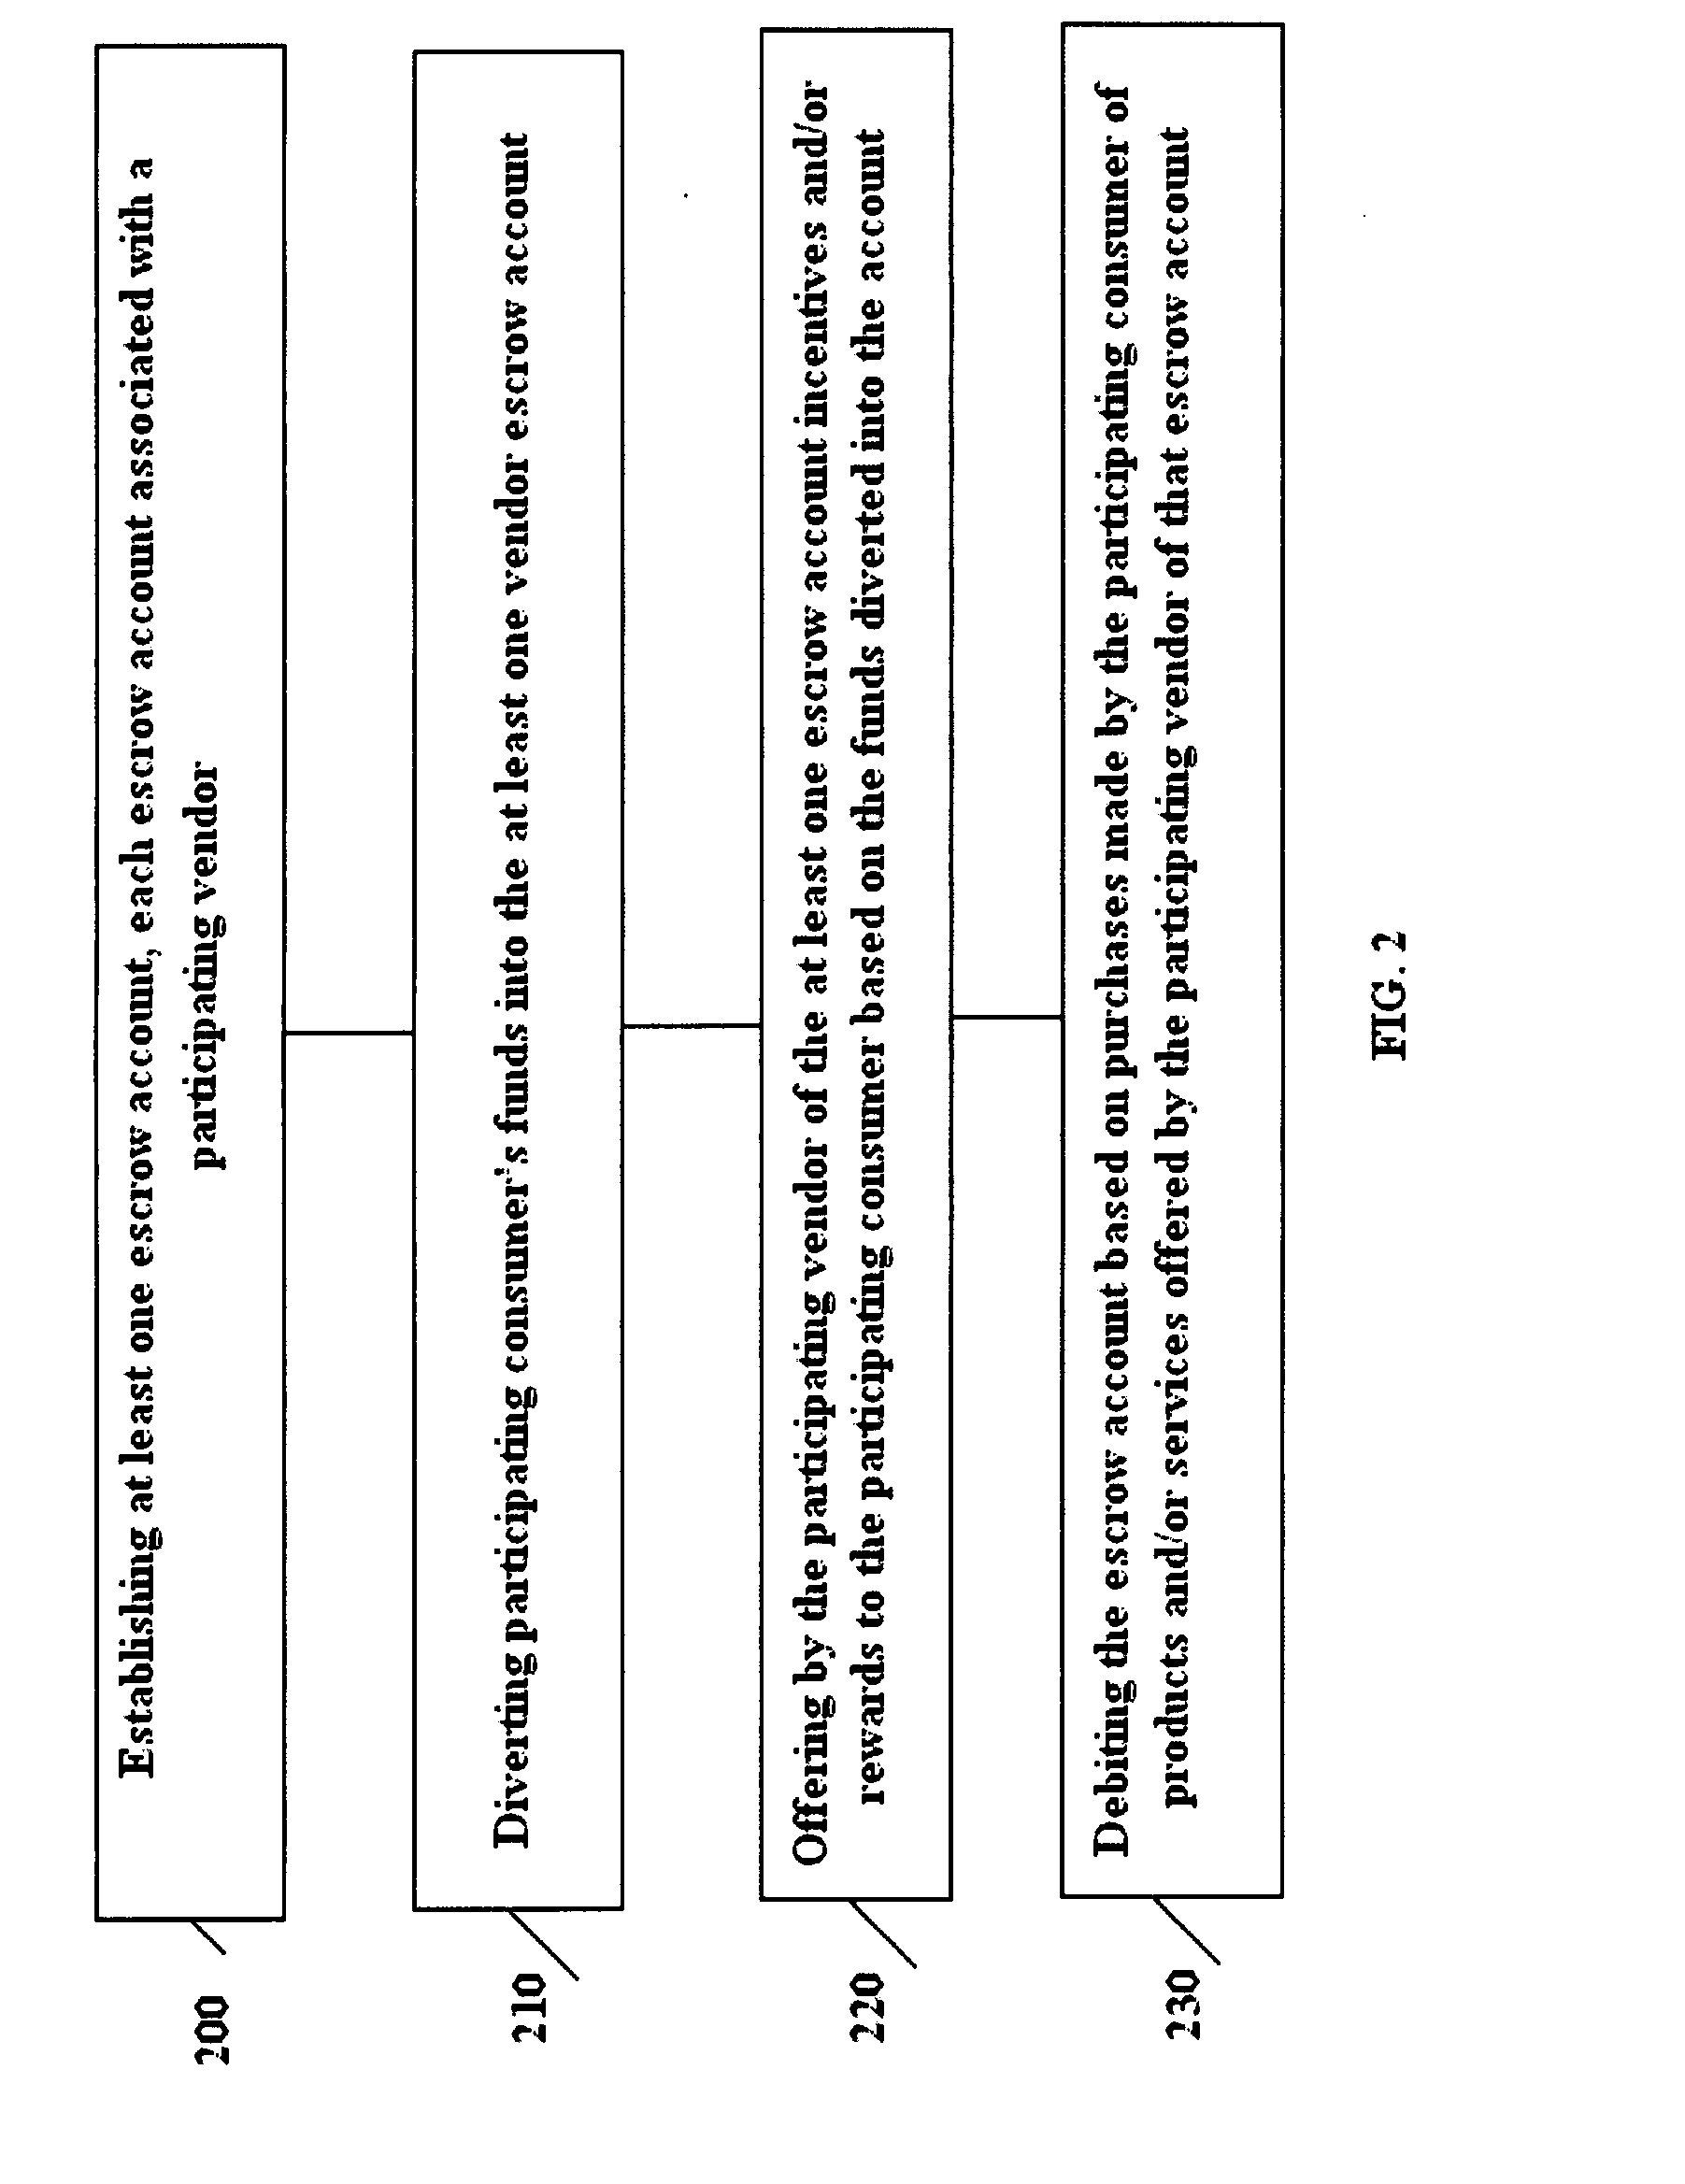 System and method for payment of consumer purchases via vendor escrow accounts